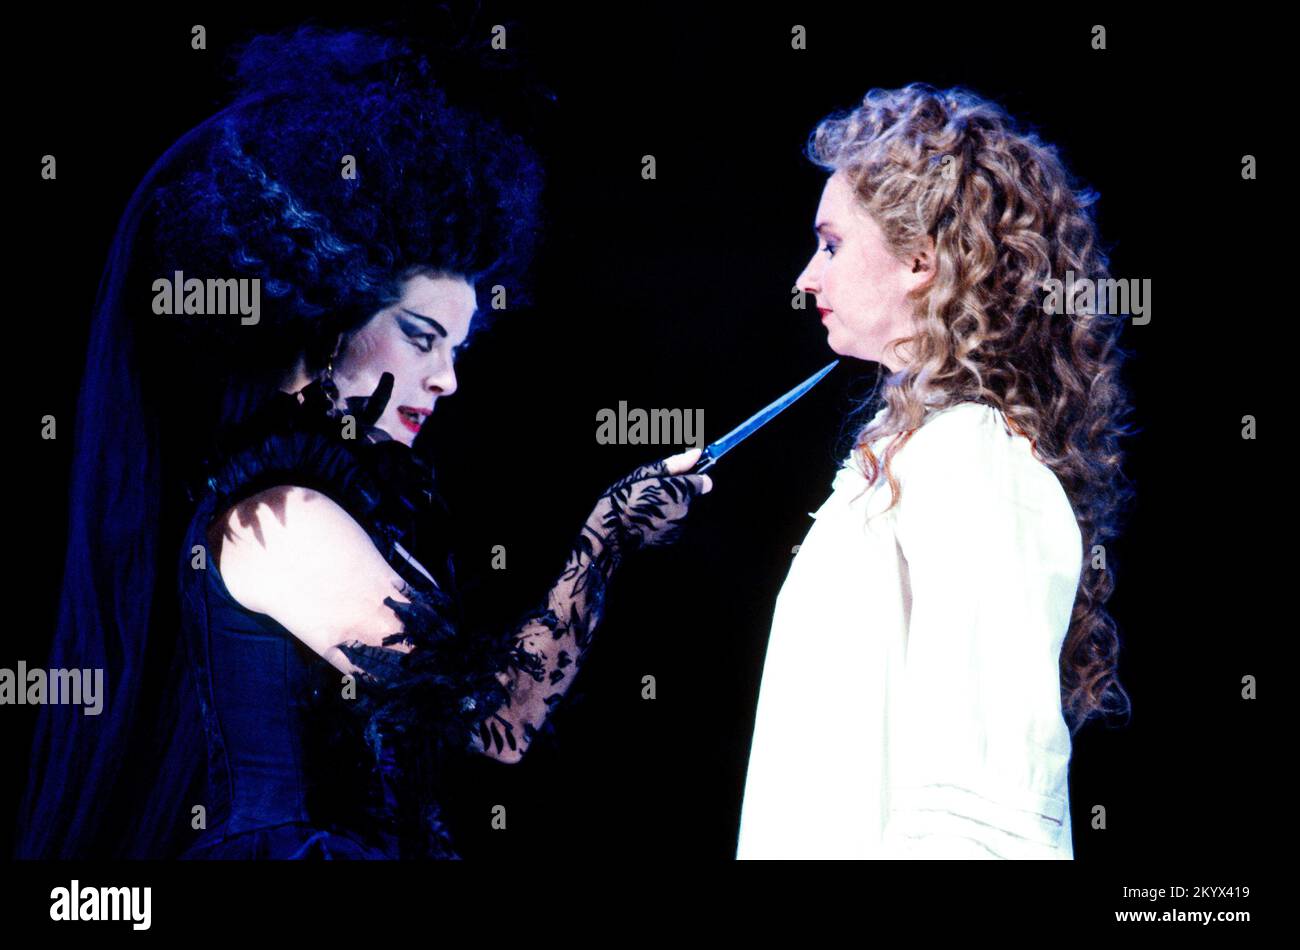 l-r: Nan Christie (The Queen of the Night), Cathryn Pope (Pamina) in THE MAGIC FLUTE at English National Opera (ENO), London Coliseum, London WC2  24/08/1990  music: Wolfgang Amadeus Mozart  libretto: Emanuel Schikaneder   translation: Jeremy Sams  conductor: Jane Glover  design: Bob Crowley  lighting: Nick Chelton  director: Nicholas Hytner Stock Photo